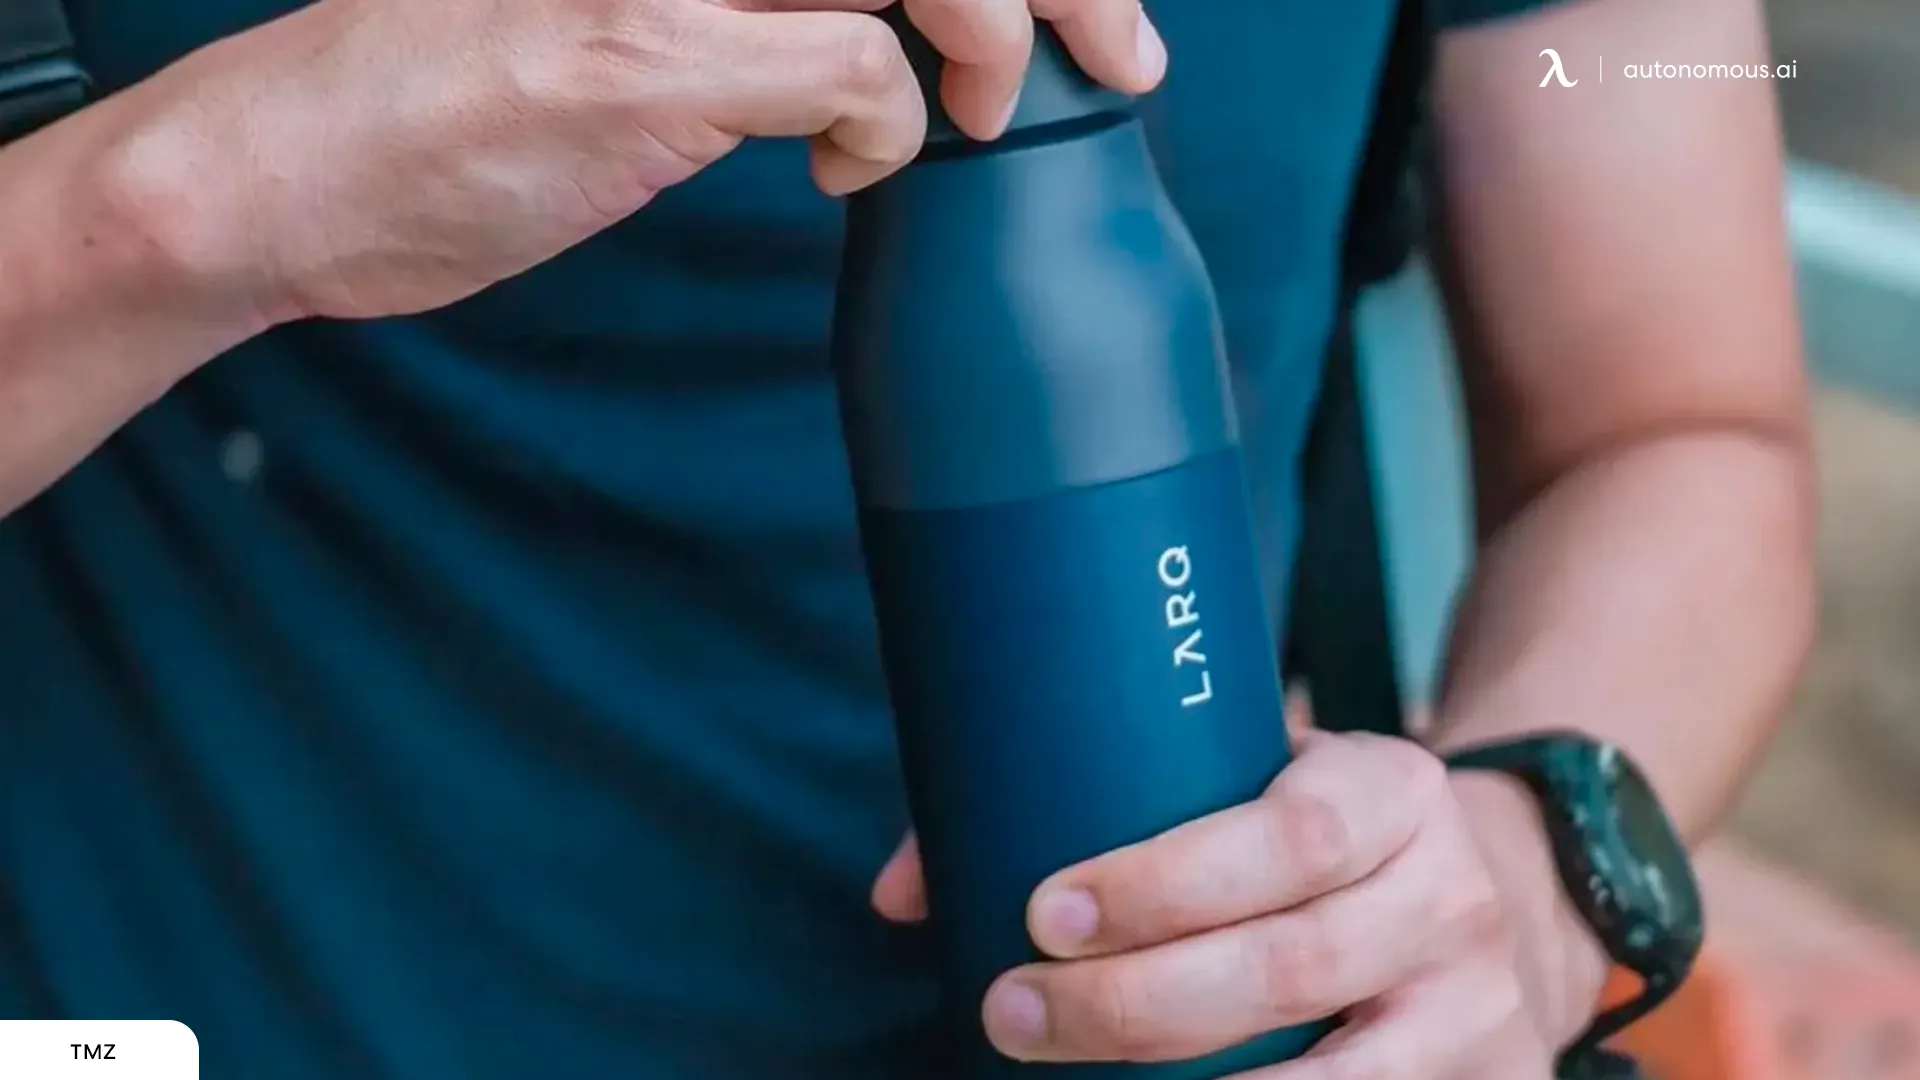 Self cleaning water bottle - waste management